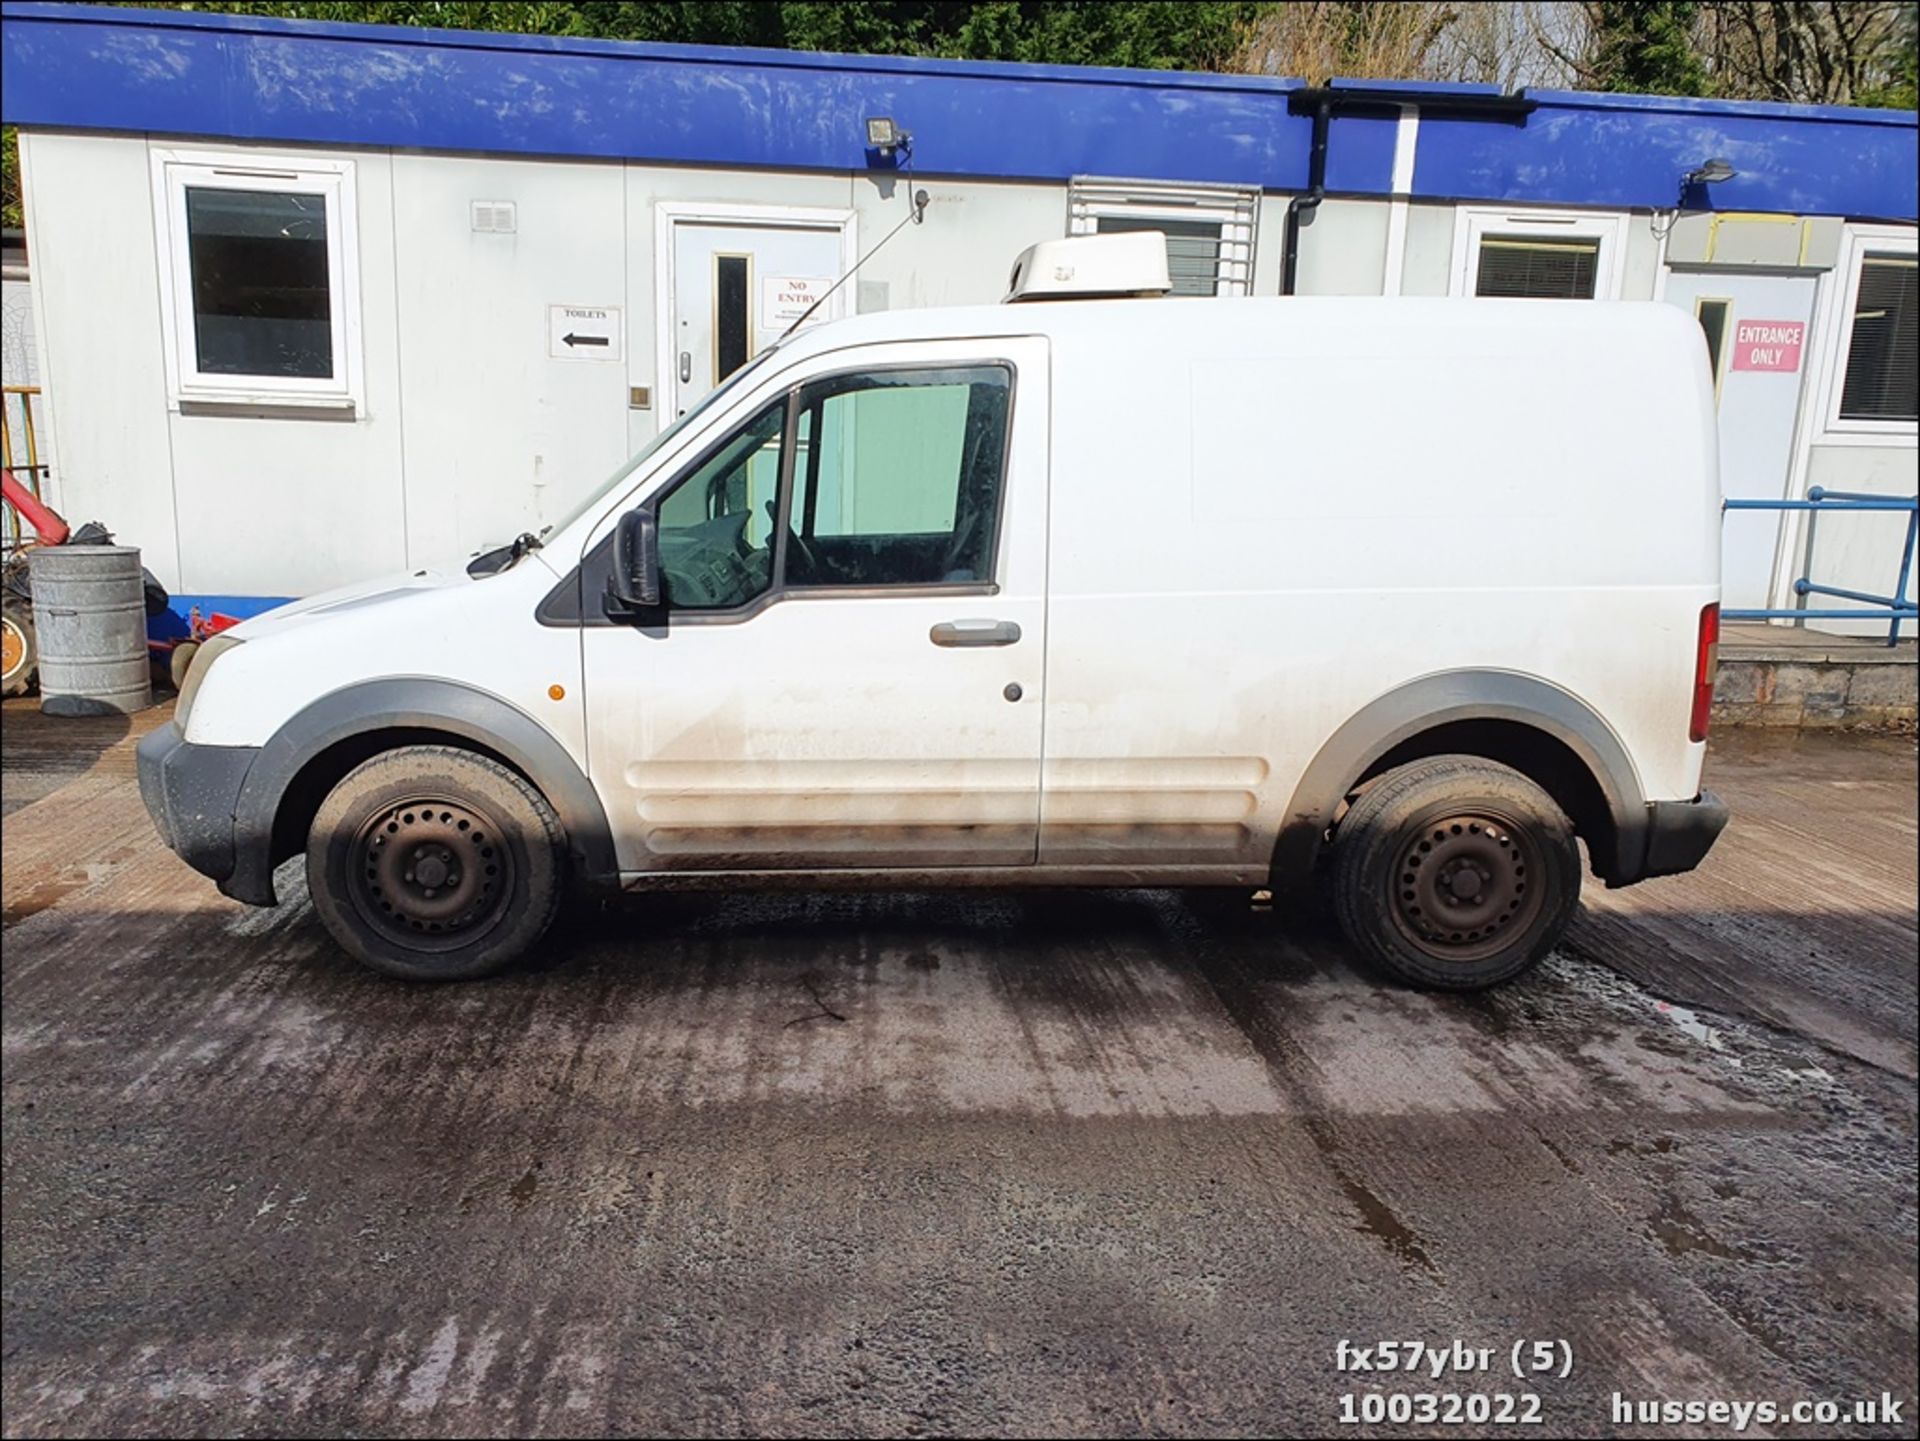 07/57 FORD TRANSIT CONNECT REFRIDGERATED T200 75 - 1753cc 4dr Van (White, 202k) - Image 6 of 22